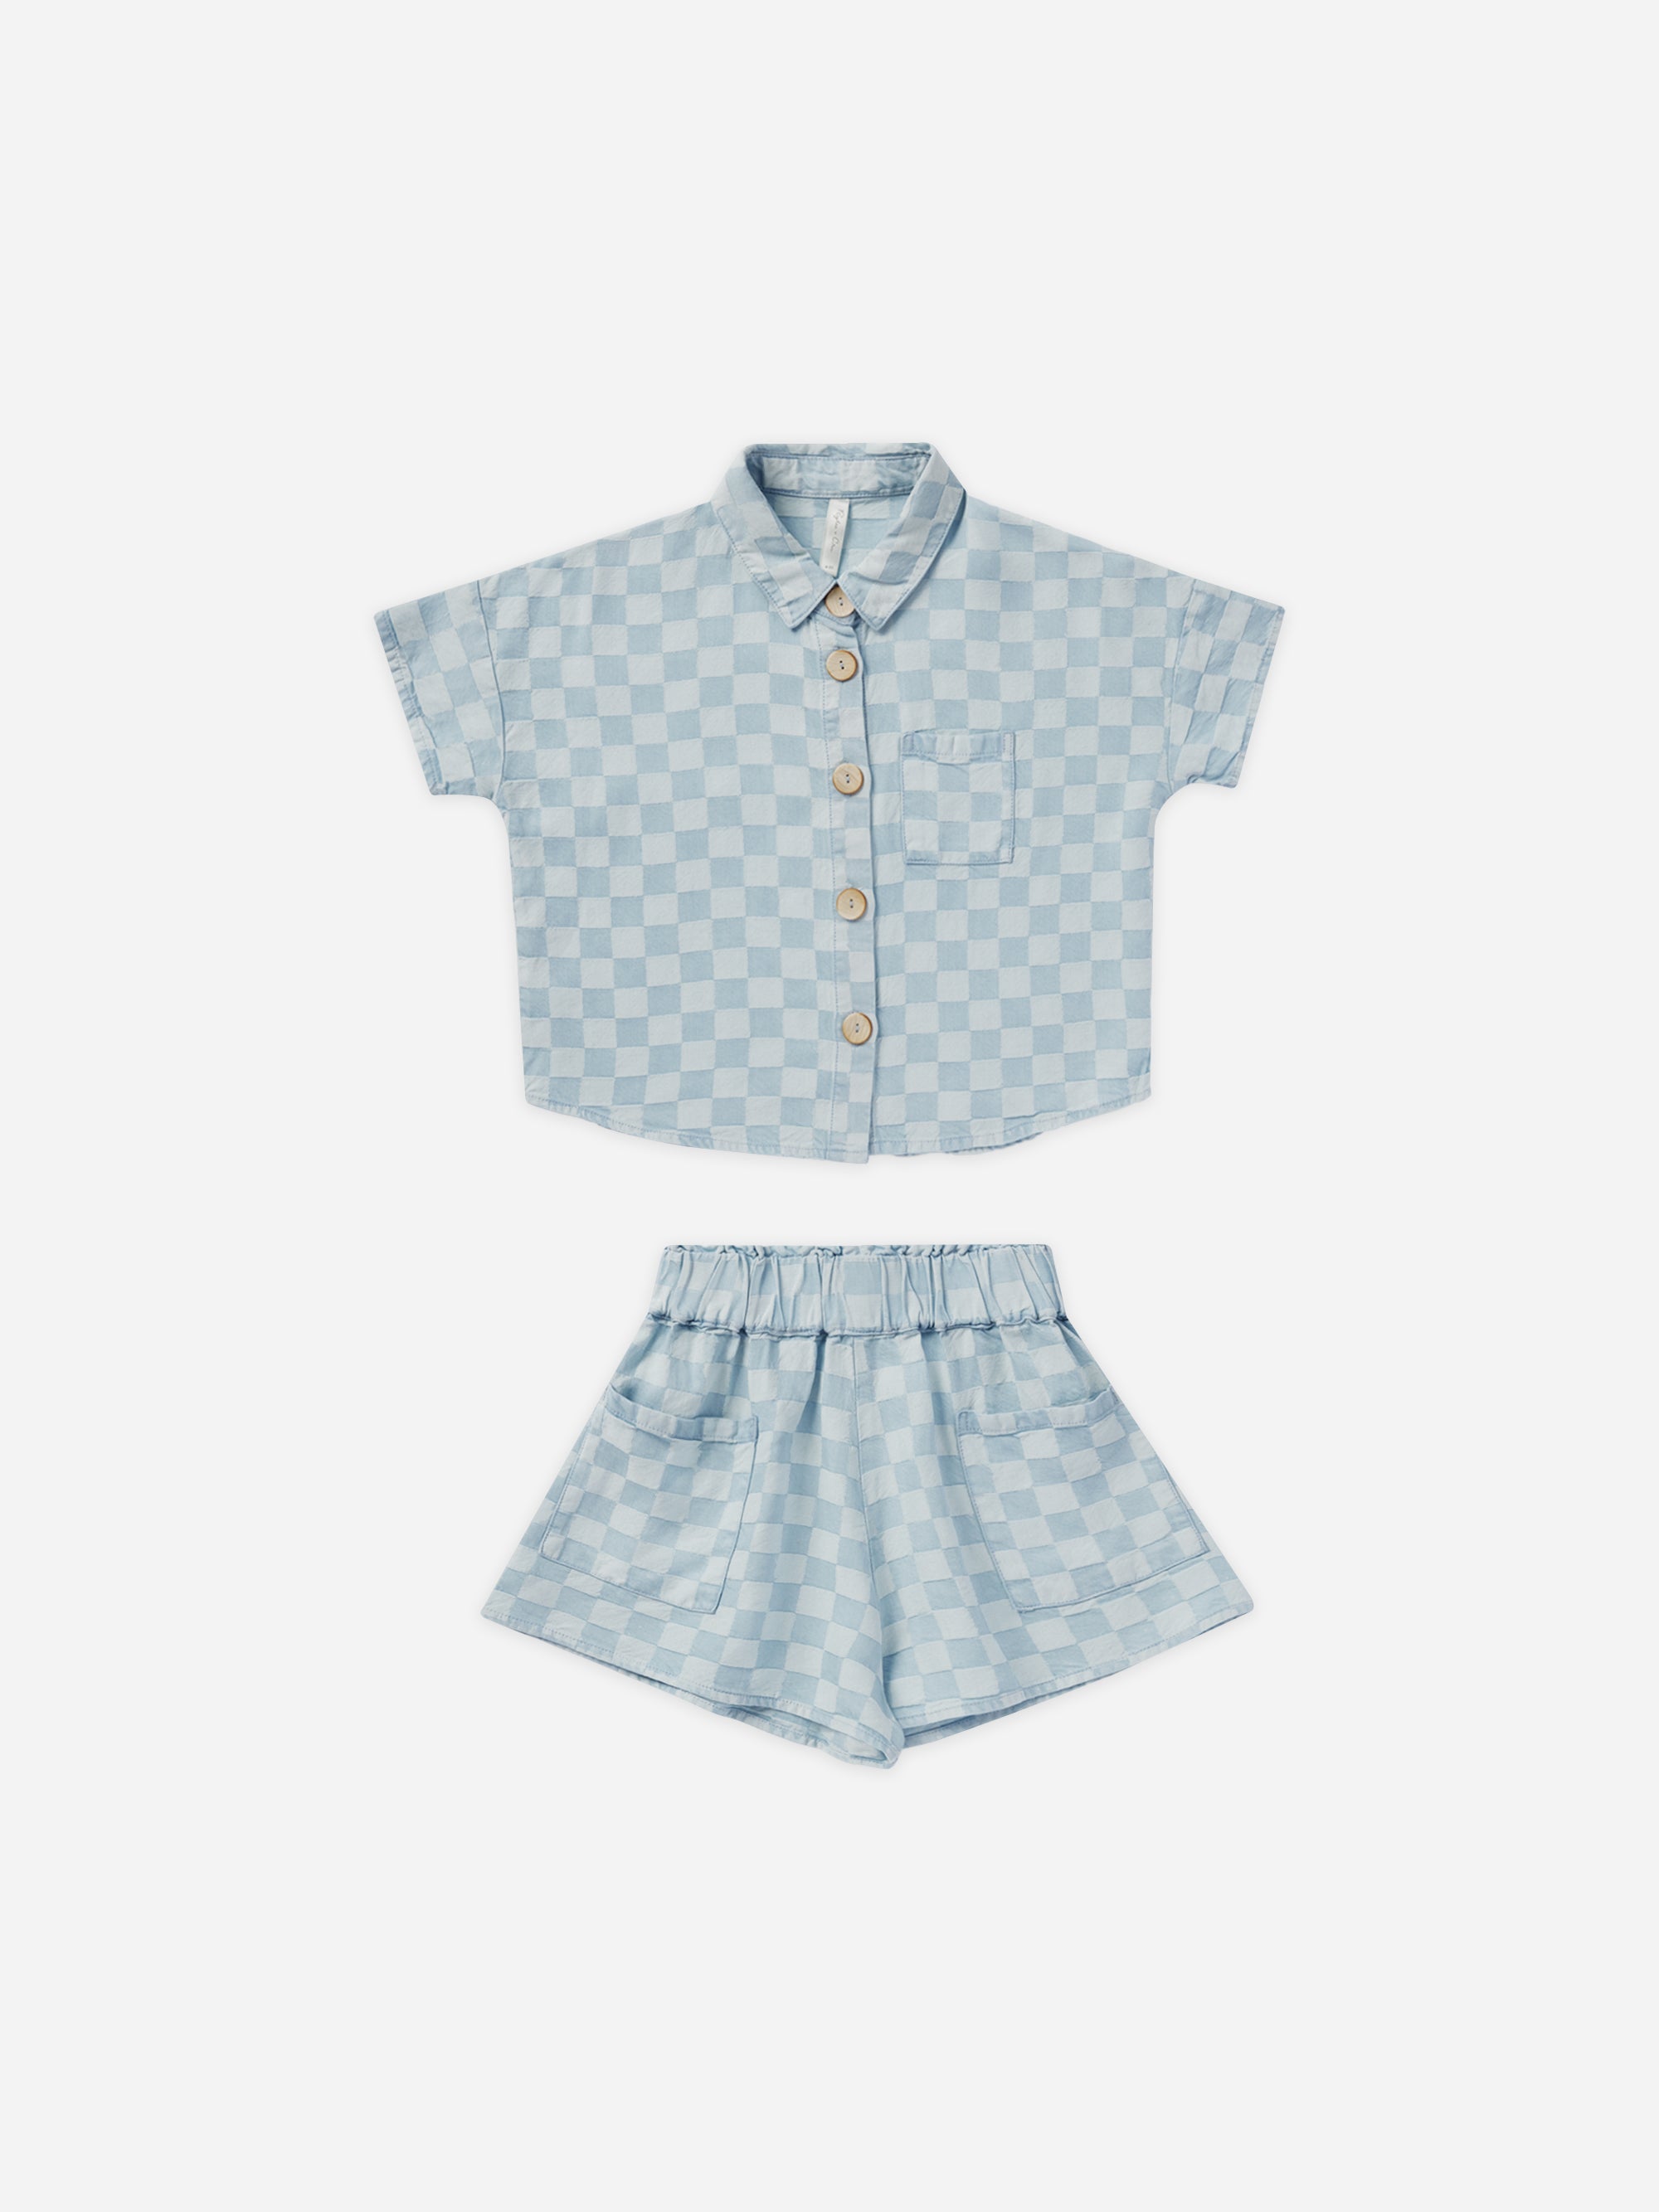 Kelli Set || Blue Check - Rylee + Cru | Kids Clothes | Trendy Baby Clothes | Modern Infant Outfits |